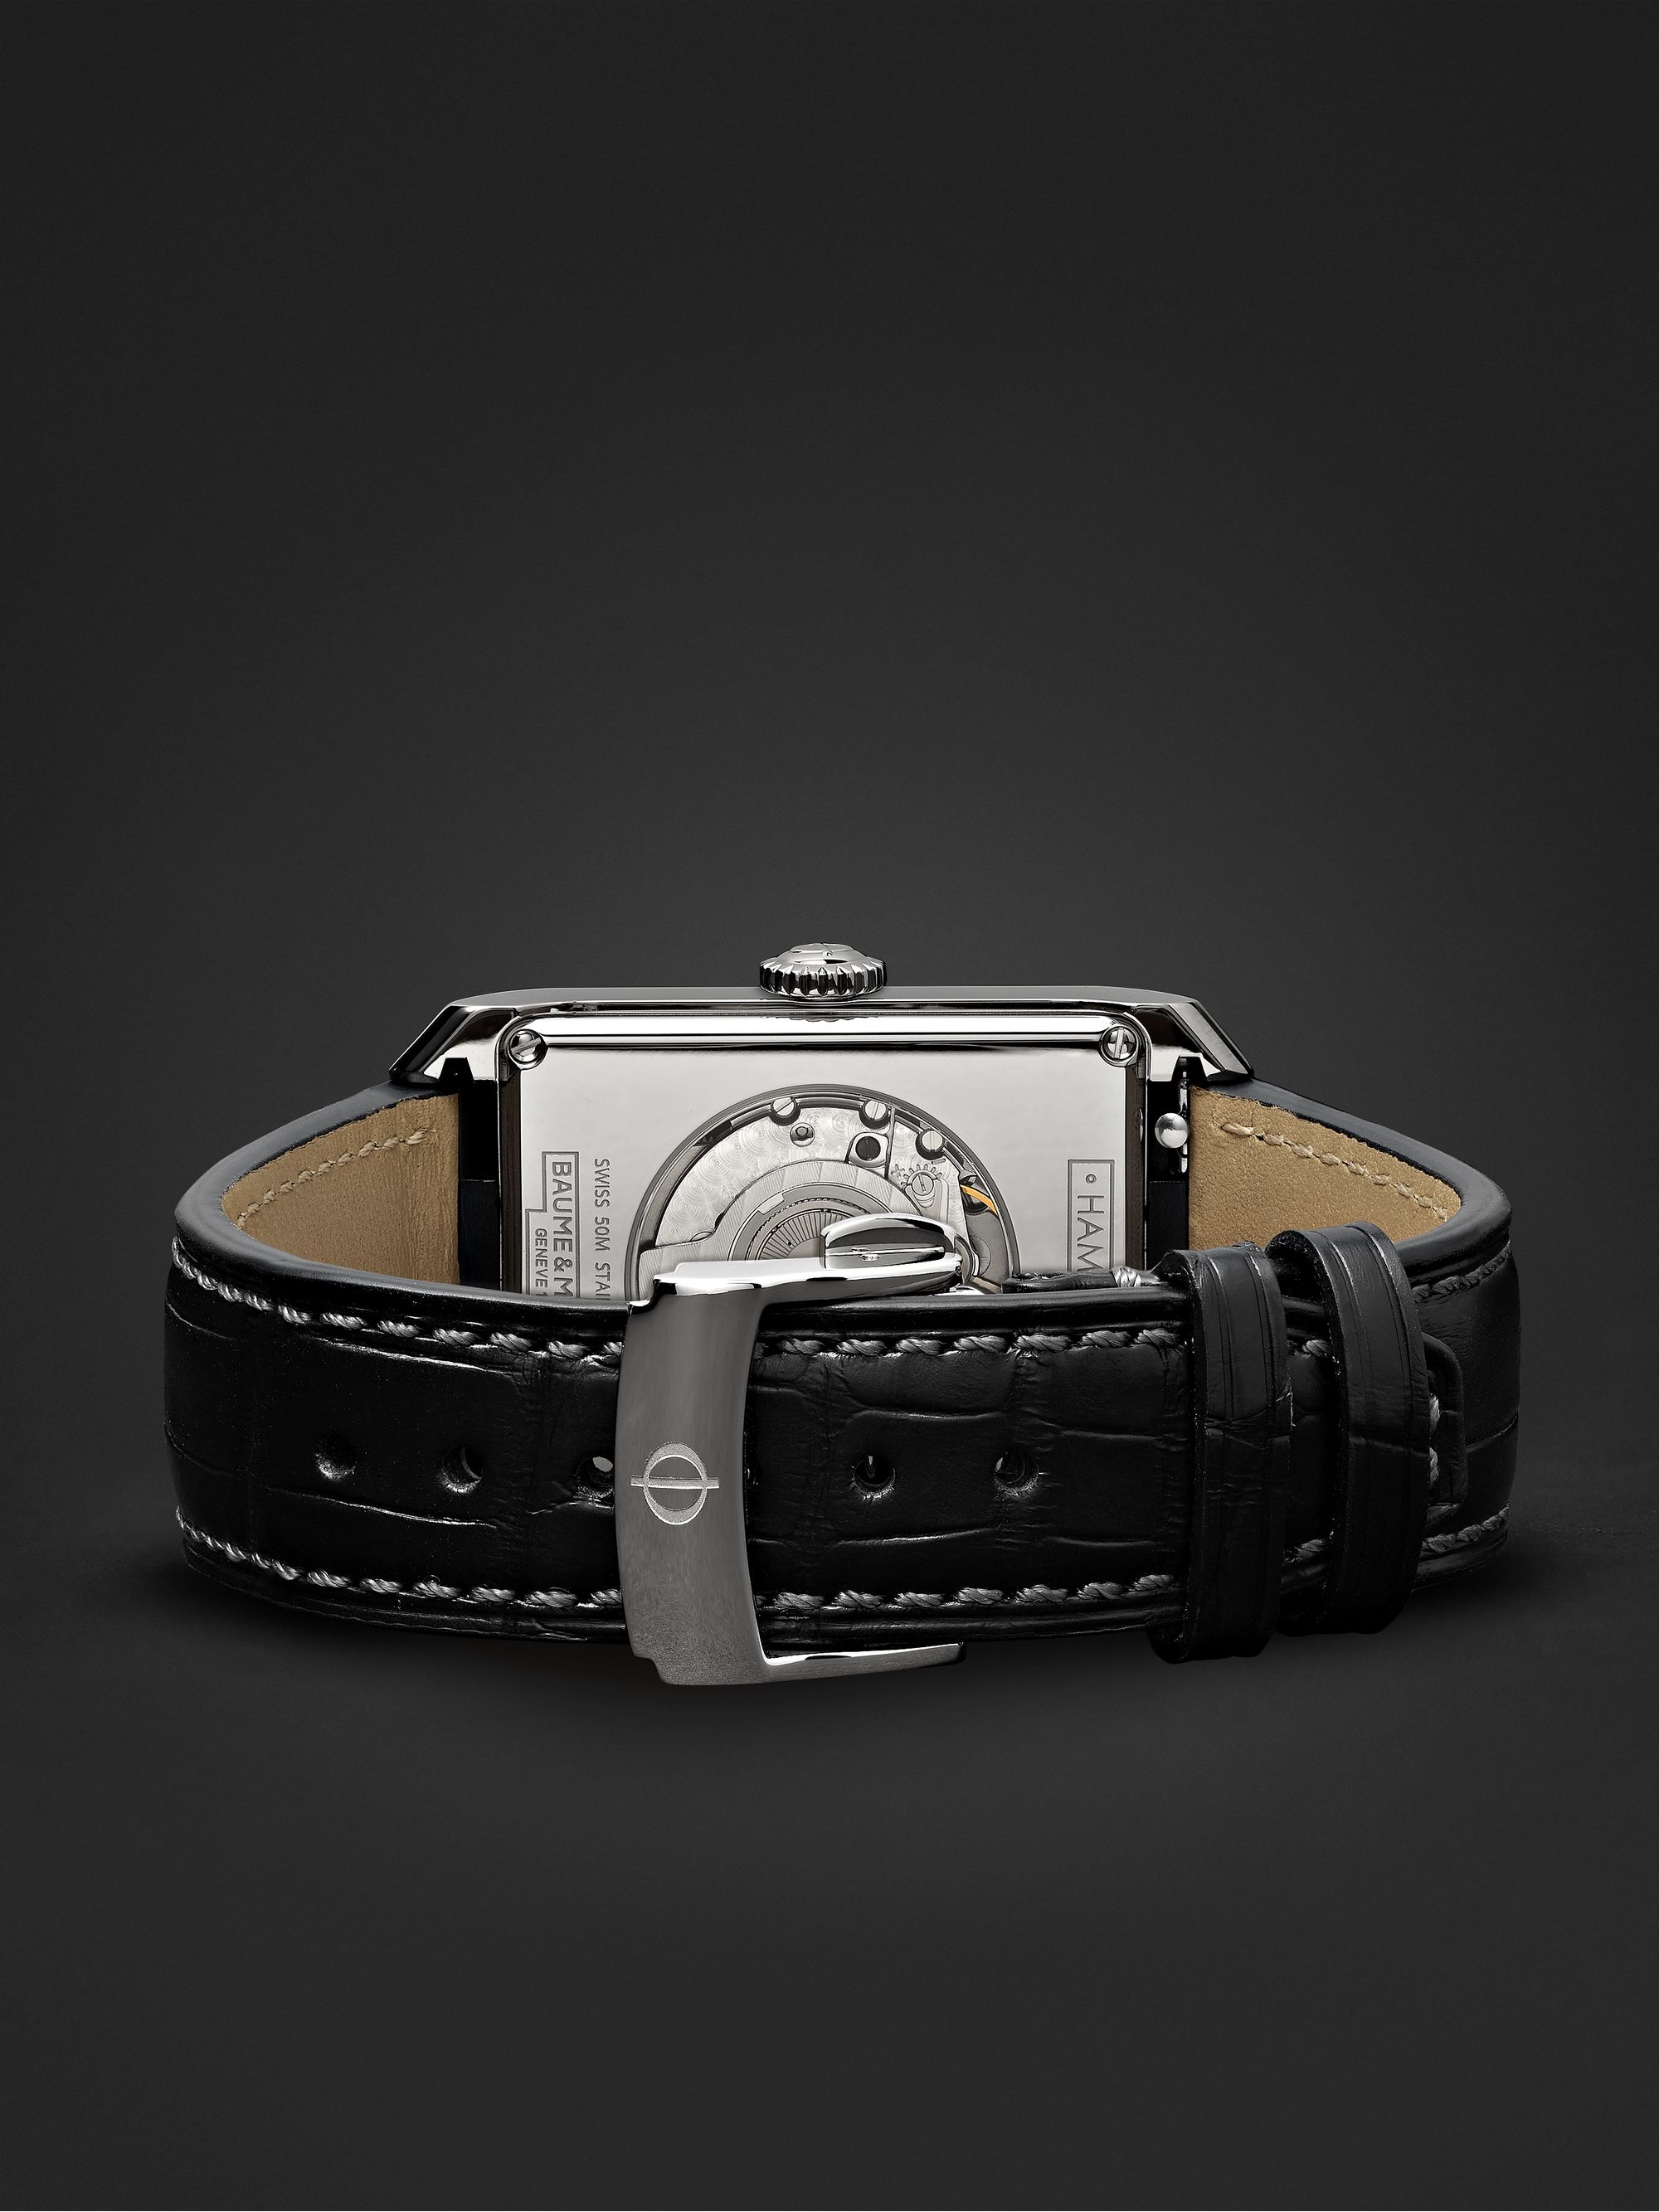 BAUME & MERCIER Hampton Automatic 31mm Stainless Steel and Alligator Watch, Ref. No. 10528